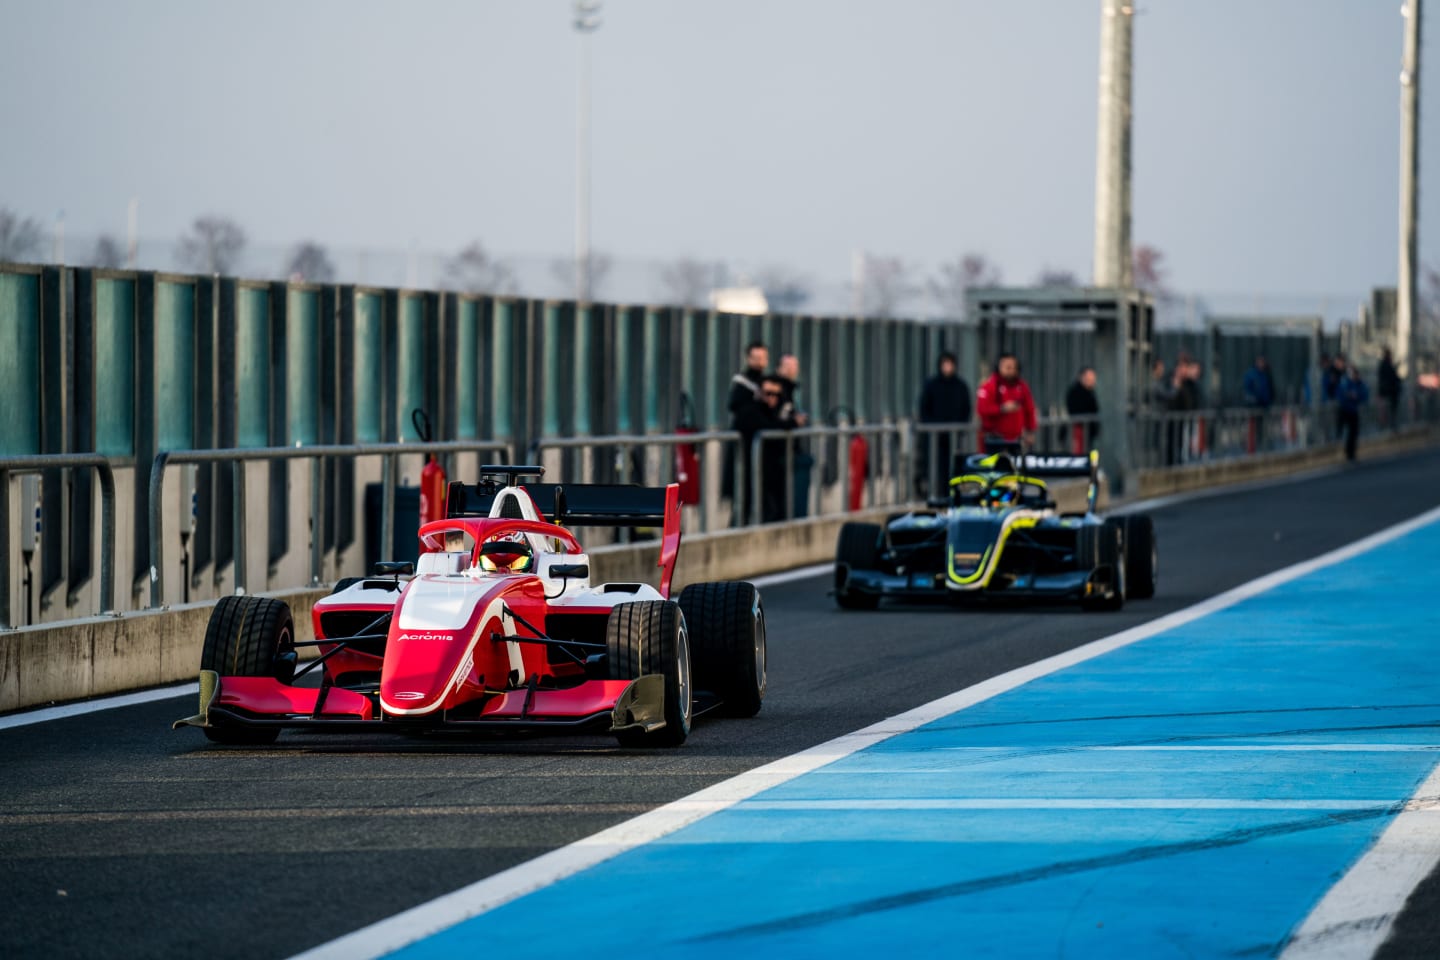 FIA Formula 3 Championship - Shakedown.Magny Cours, France.Wednesday 20th February 2018.Marcus